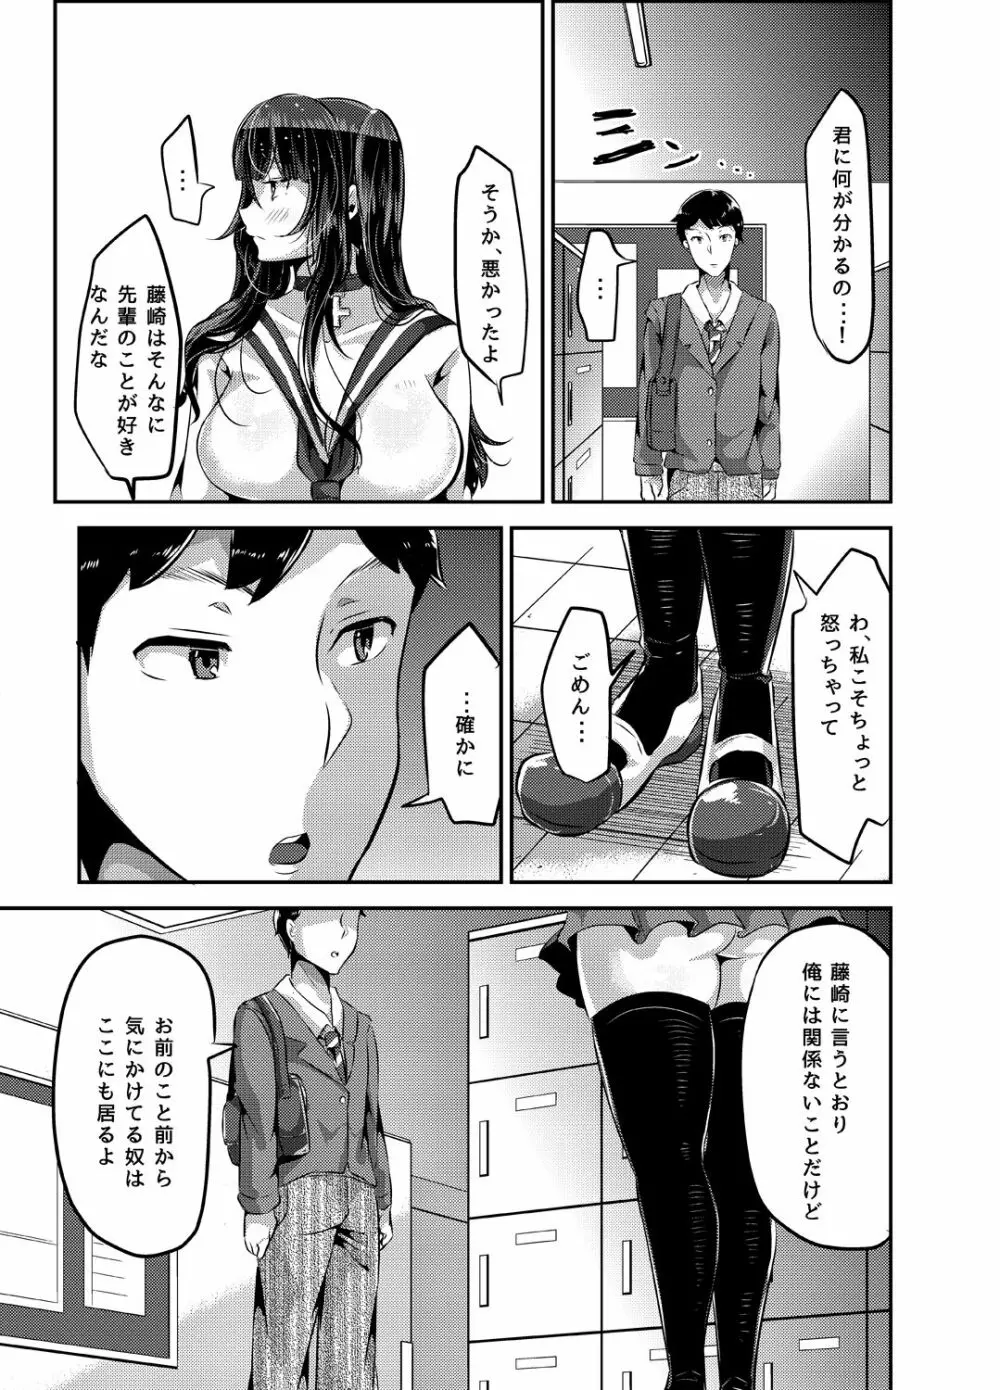 好き好き好き好き好き好き好き好き ver.2 Page.27